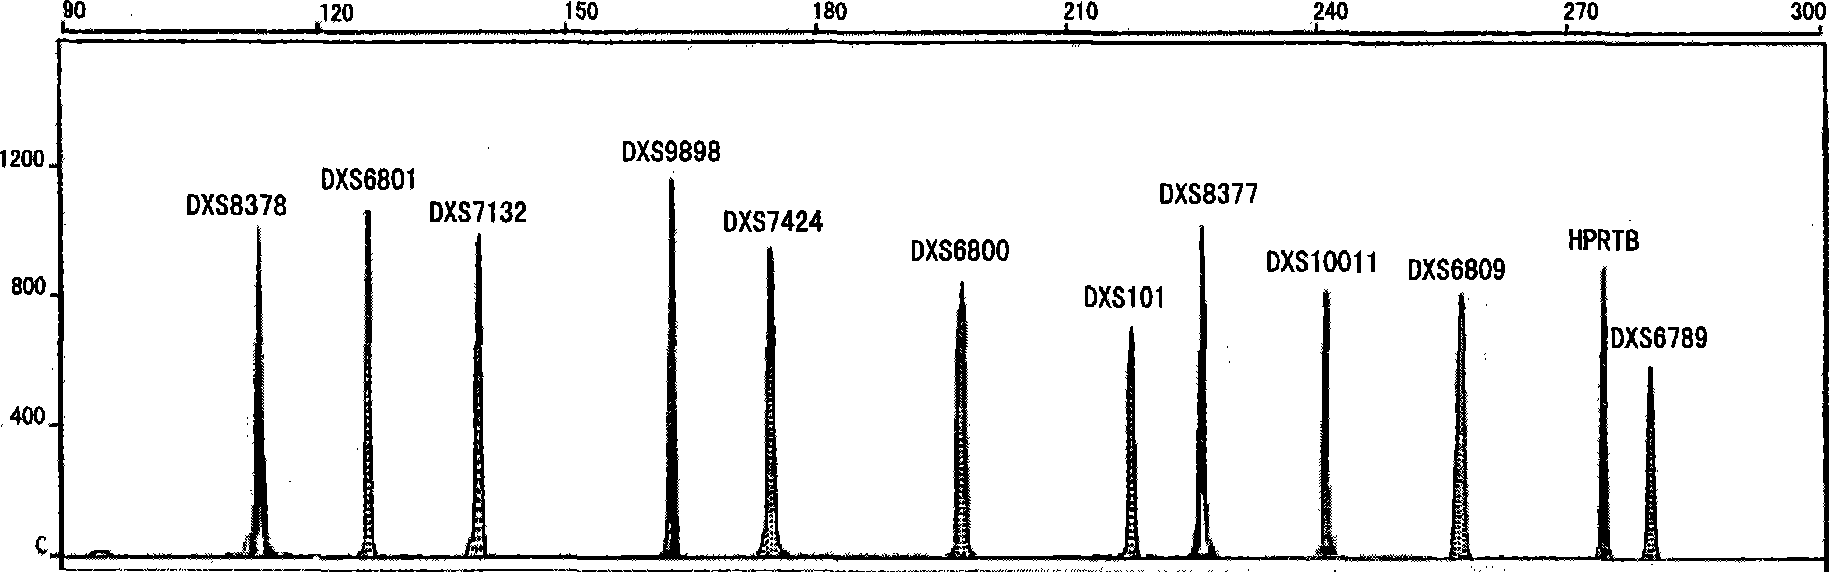 X chromosome MiniSTR fluorescent composite amplification reagent kit, preparation and use thereof